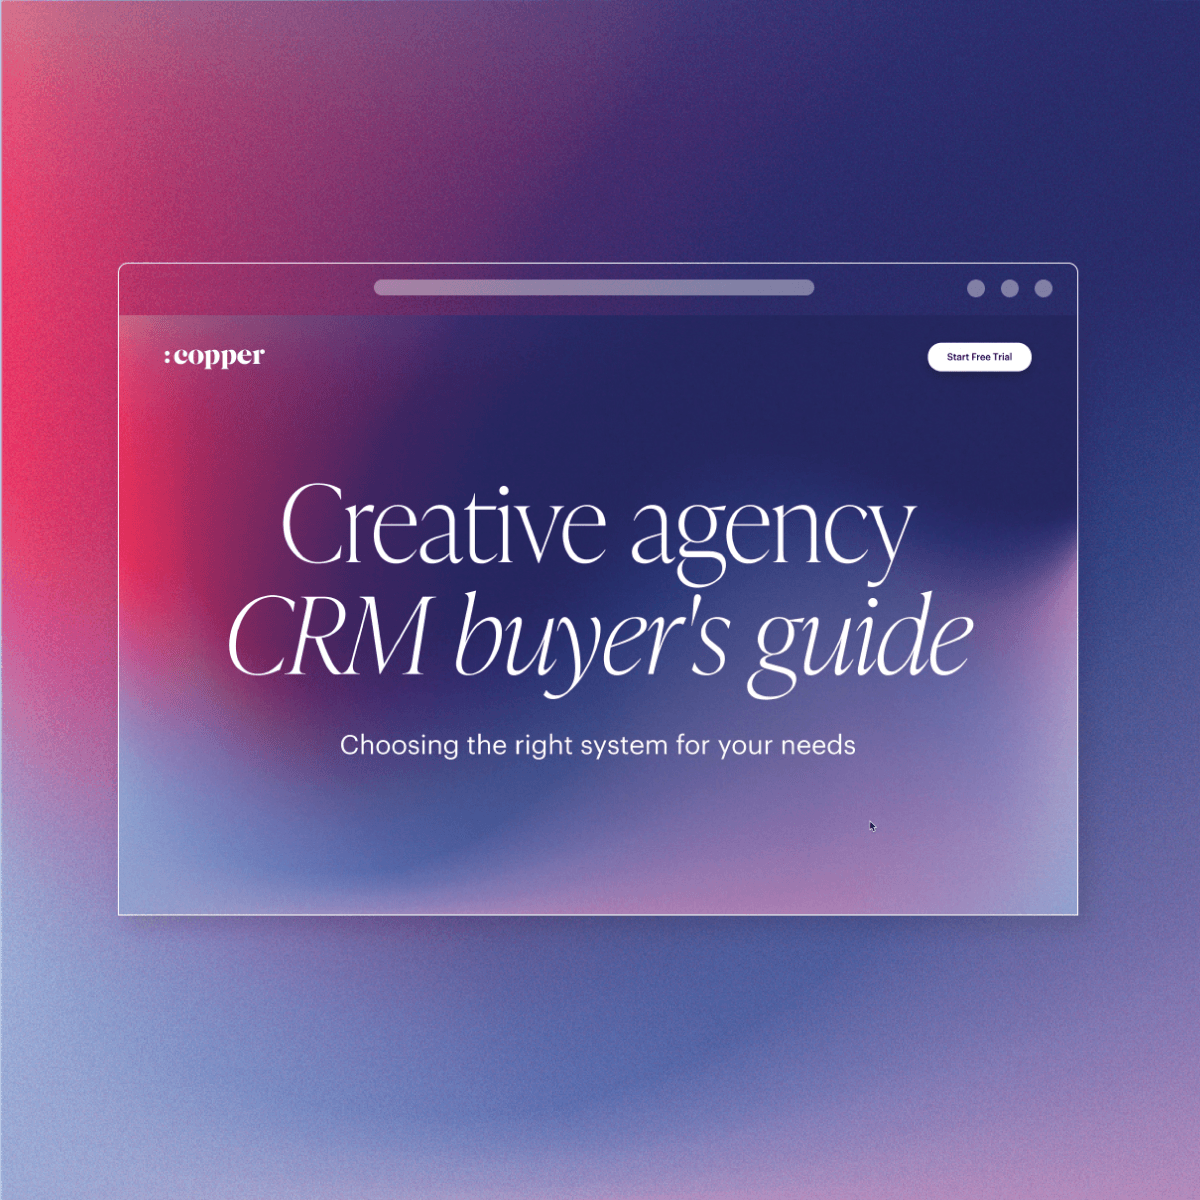 Image for post Creative agency CRM buyer's guide